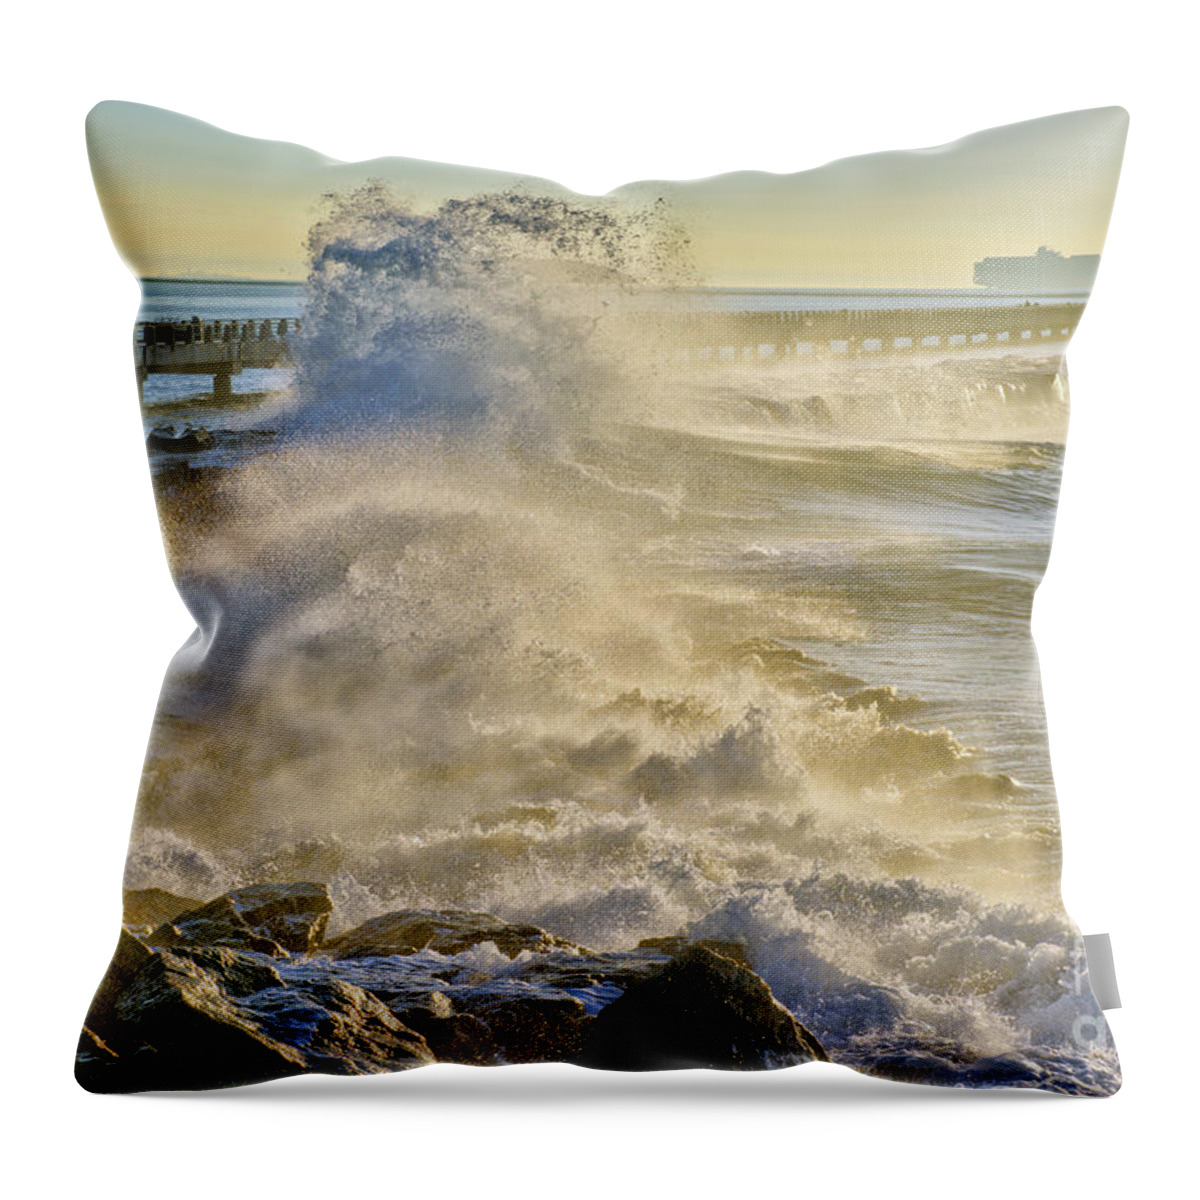 Huge Waves Cabrillo Beach San Pedroport Of Los Angeles Throw Pillow featuring the photograph Huge Waves Cabrillo Beach San Pedro by David Zanzinger